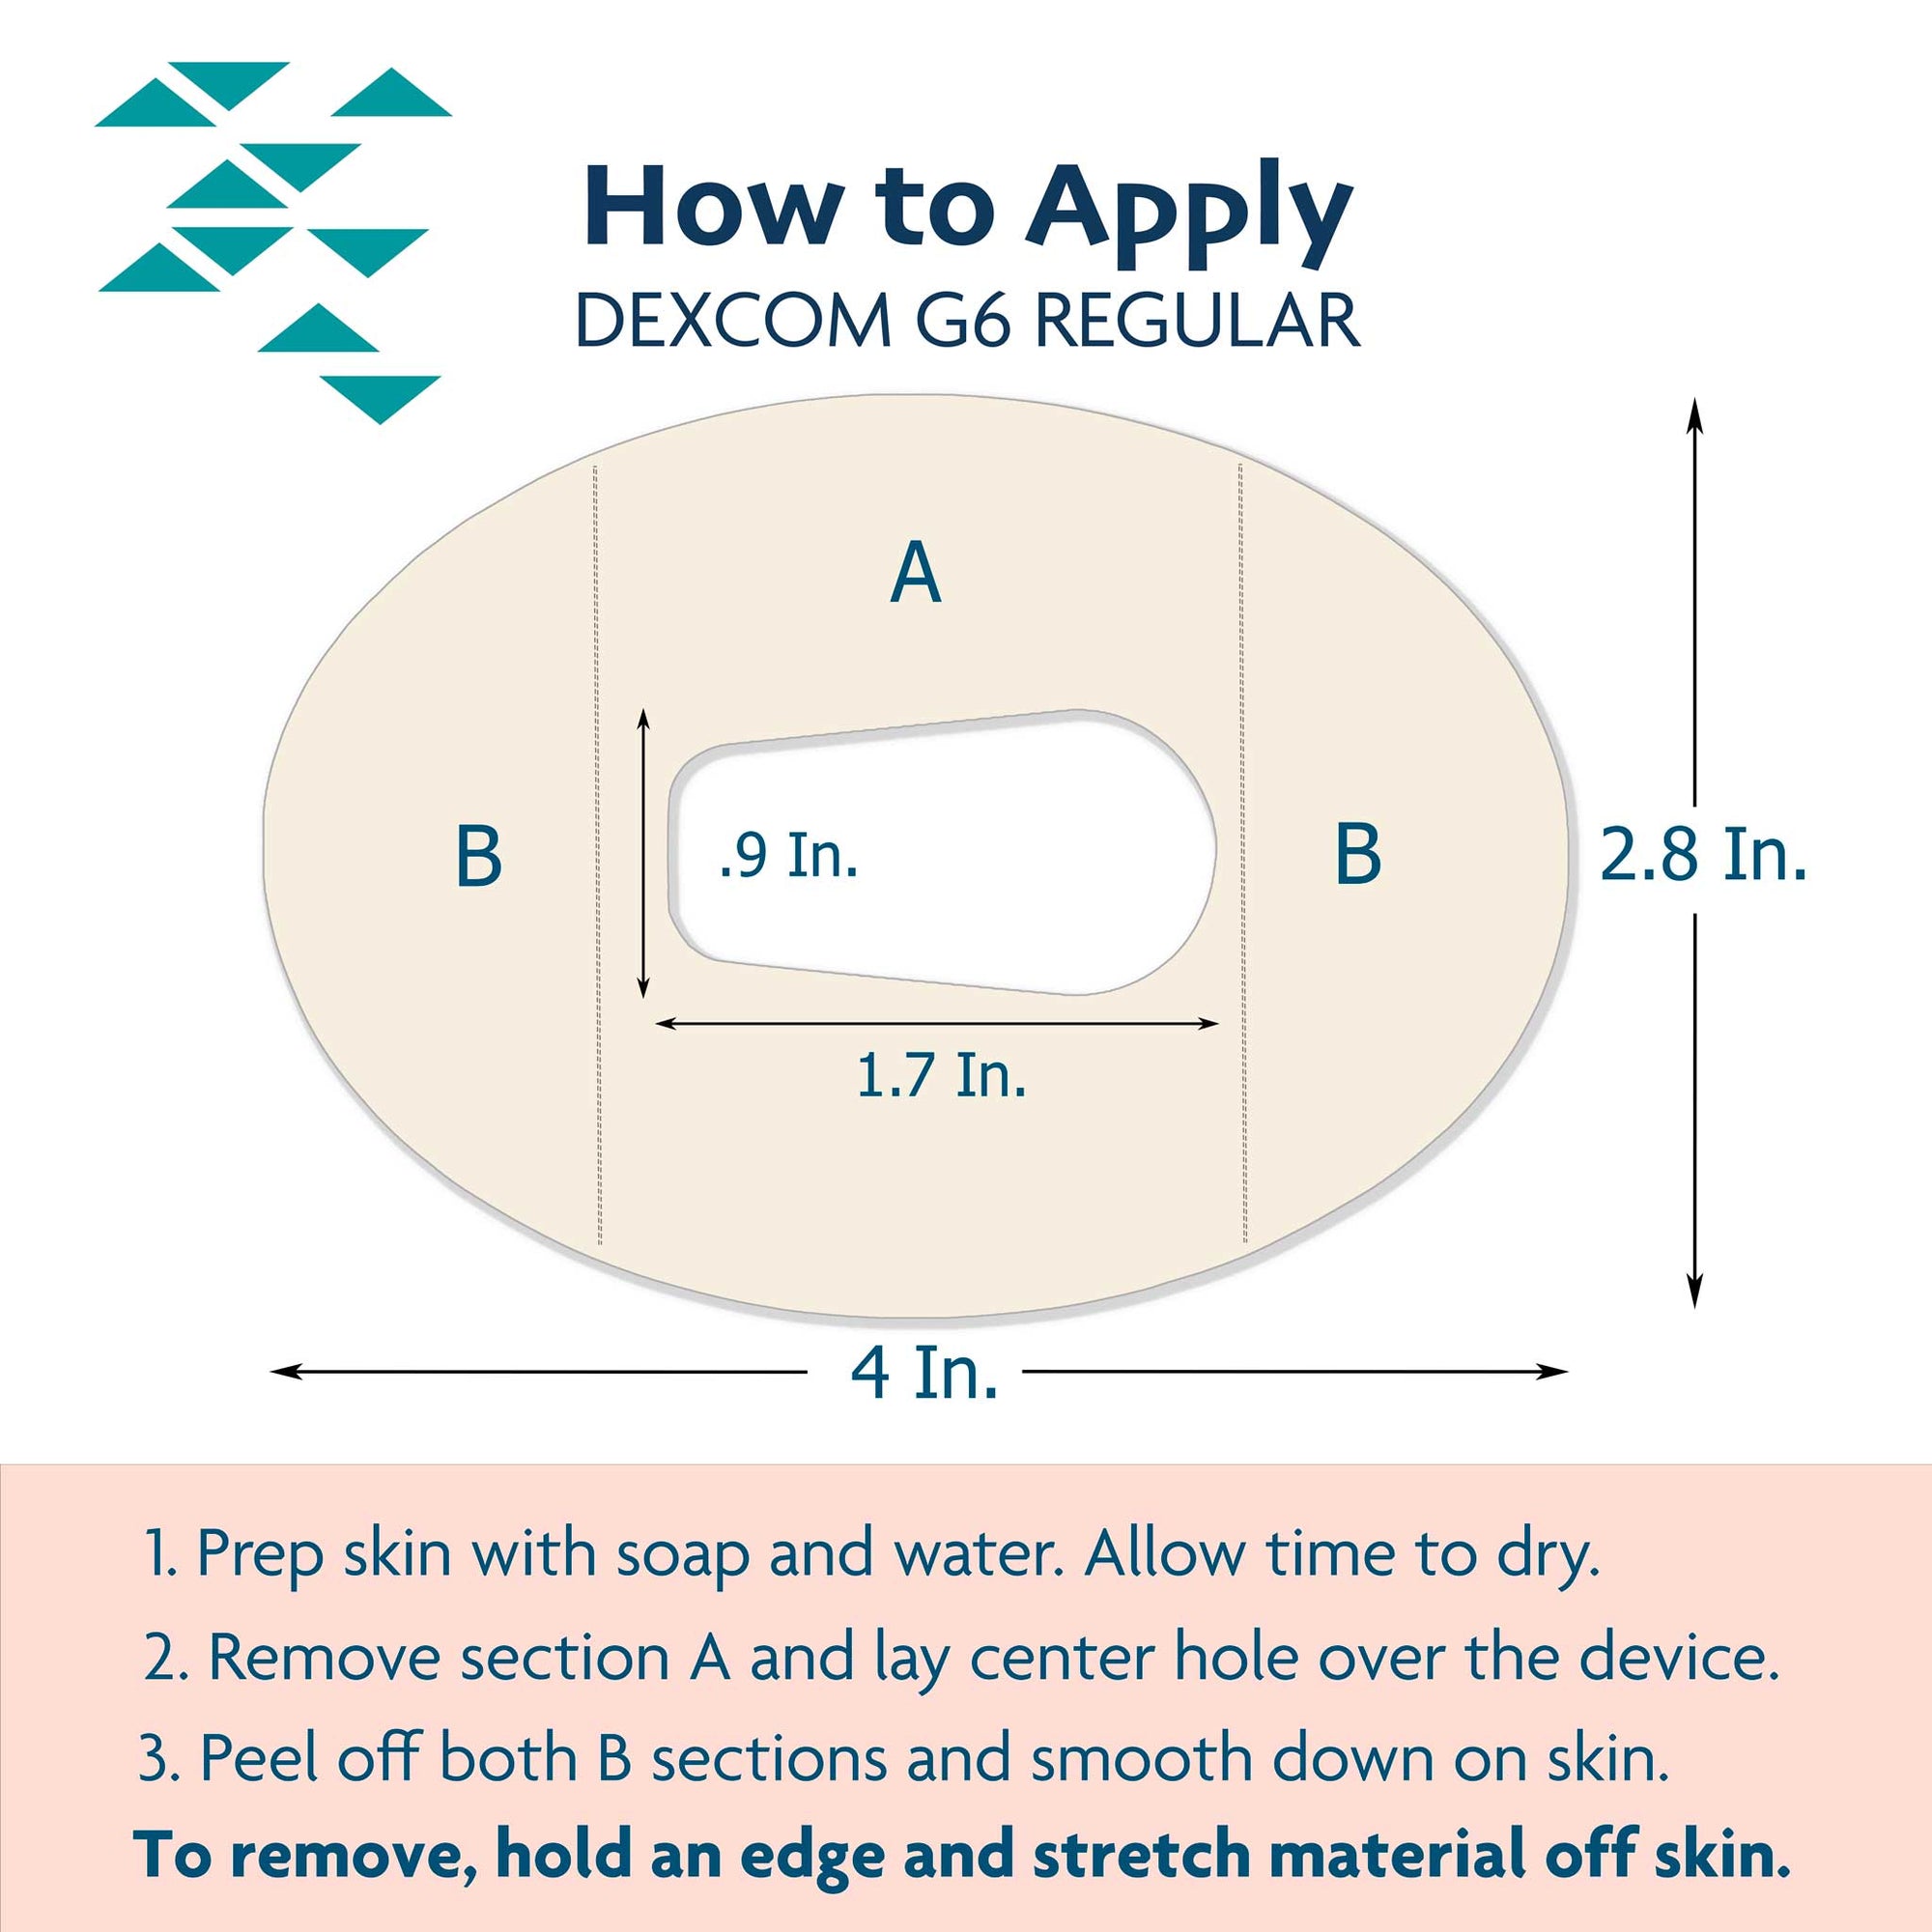 ExpressionMed Guide for properly applying dexcom infusion set patch